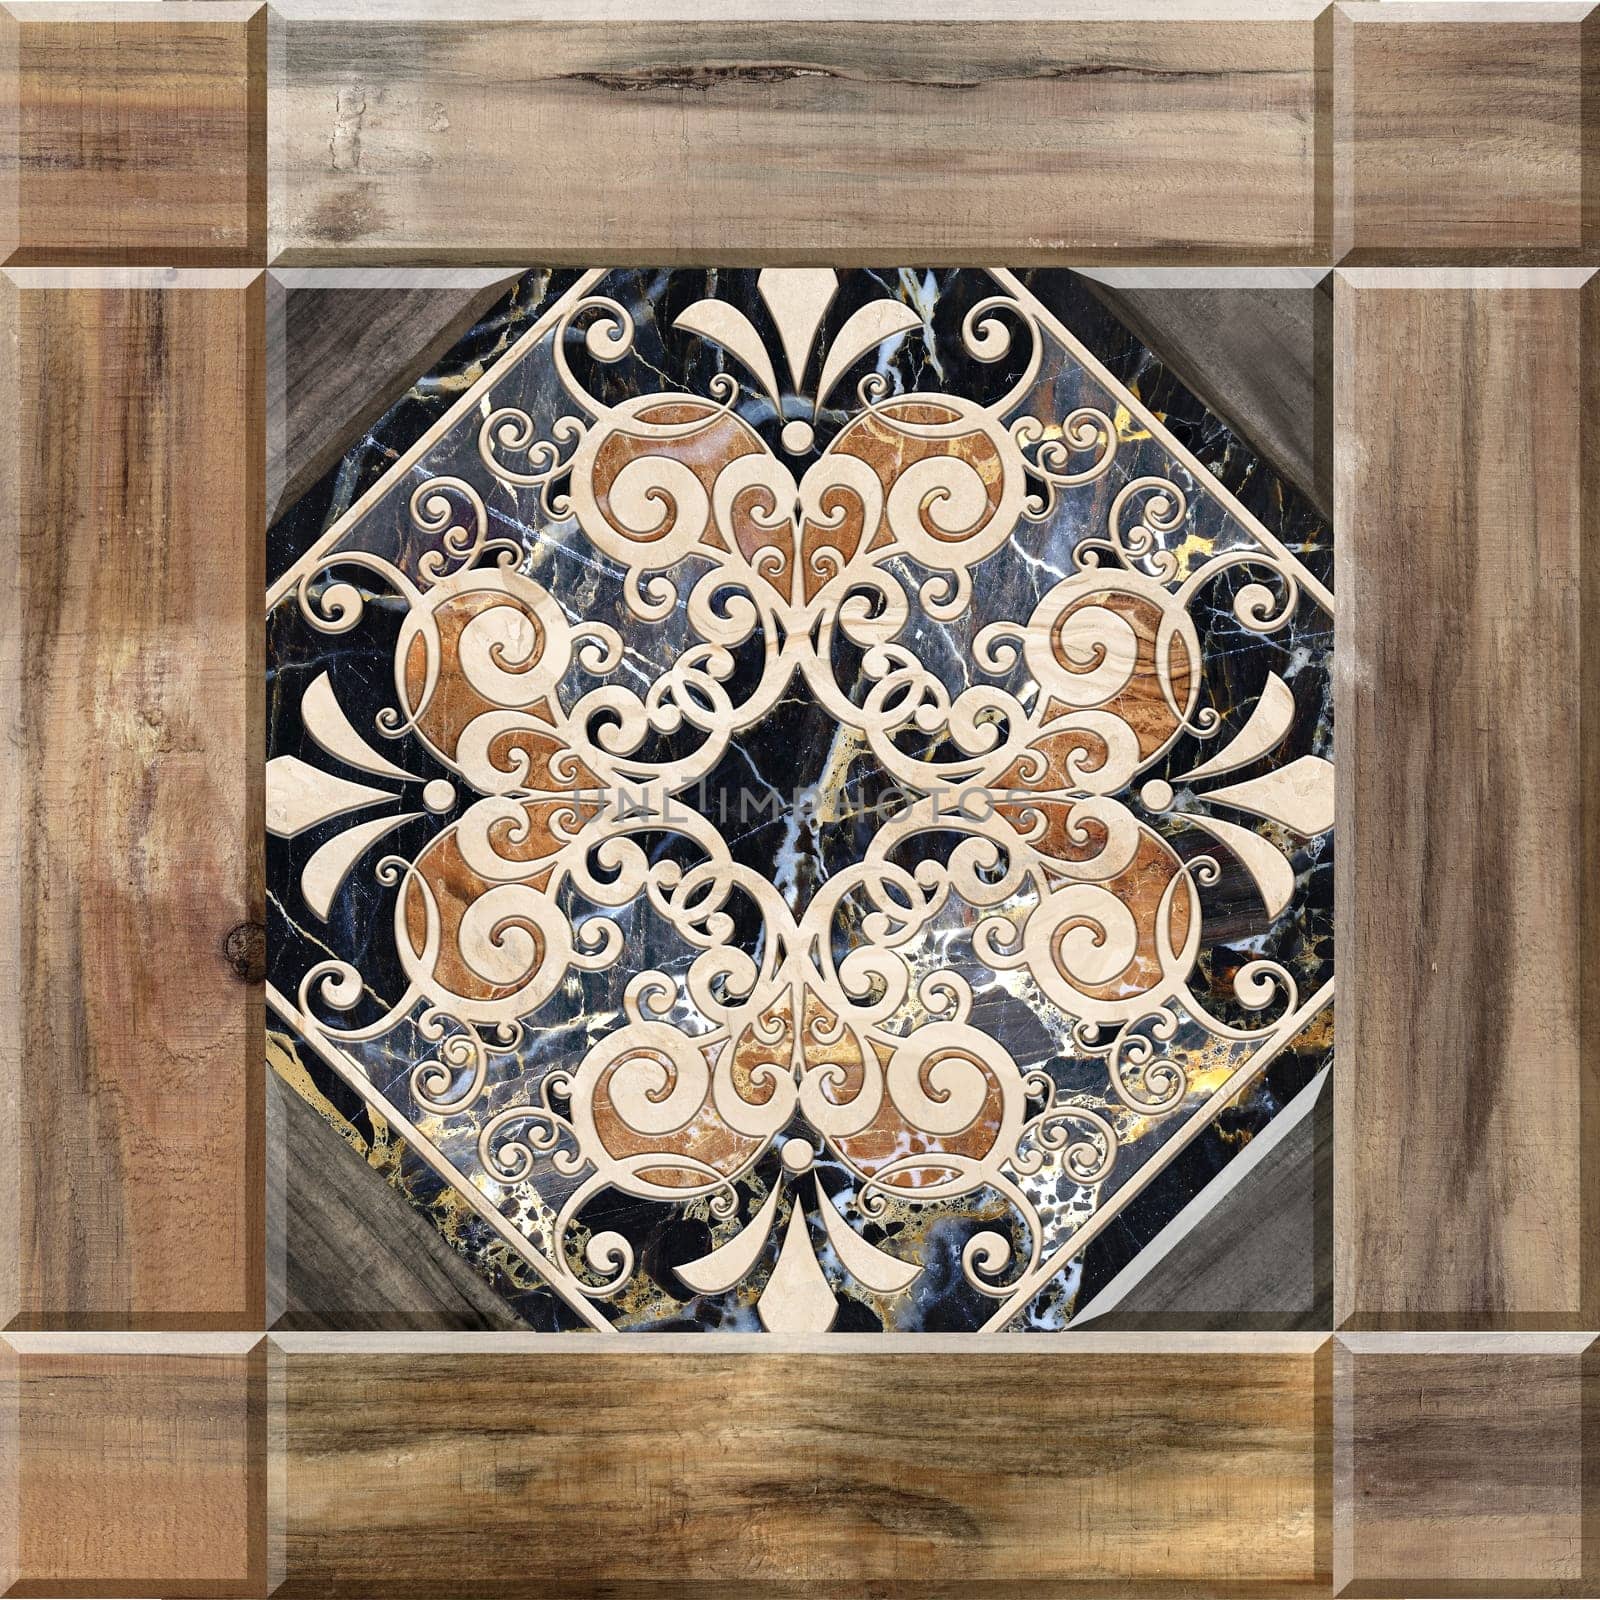 Digital tiles design. 3D rendering Colorful ceramic wall and floor tiles decoration. Abstract damask patchwork pattern with geometric and floral ornaments, Vintage tiles digital design . High quality photo